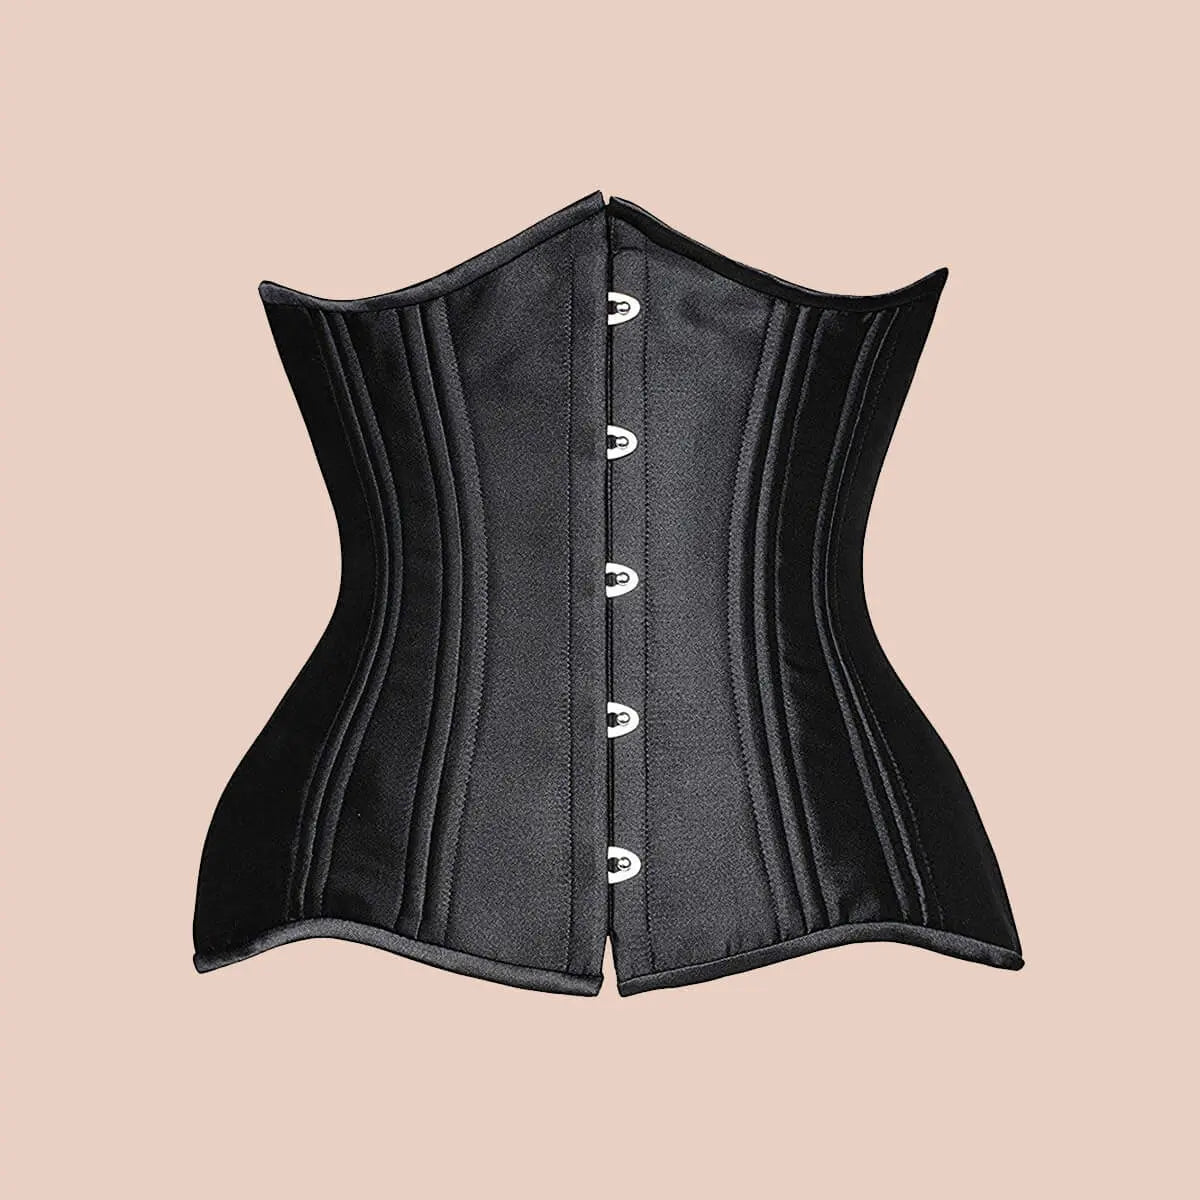 Luxx Curves 25 Bones Waist Trainer Black Size XS - $40 (49% Off Retail) -  From Tania